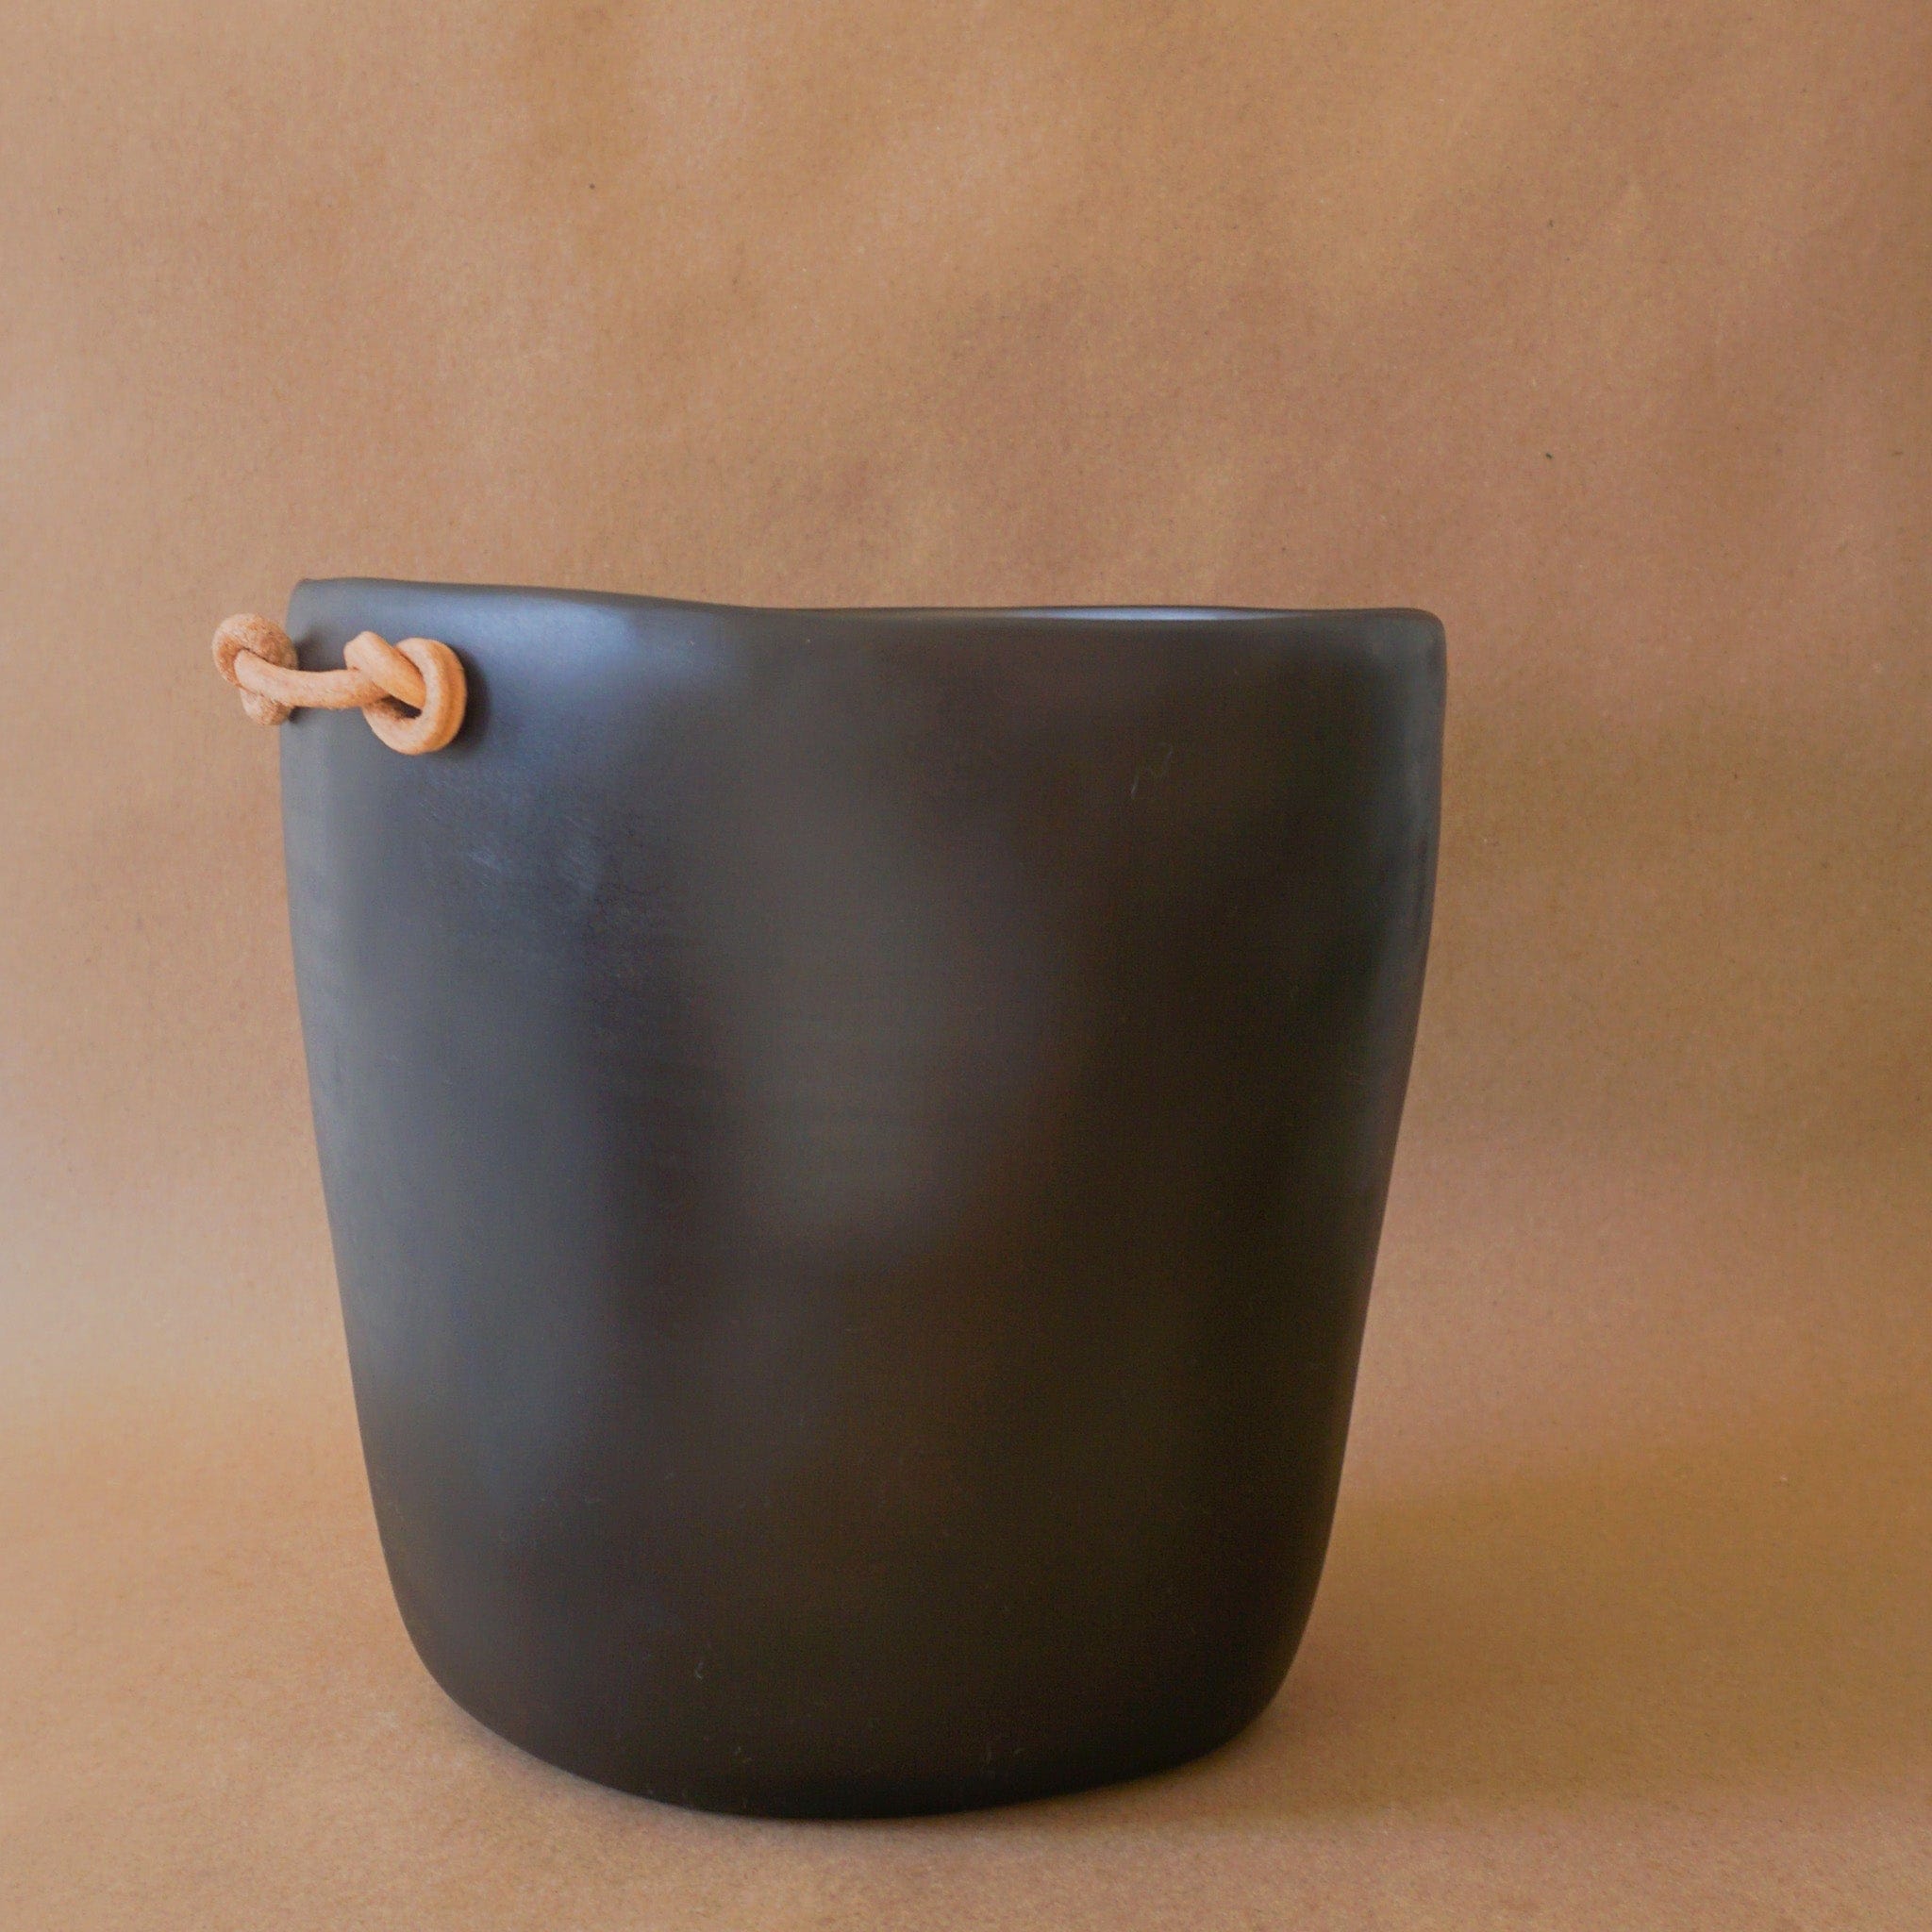 TINA FREY Kitchen Champagne Bucket with Leather Handles by Tina Frey - Smoke